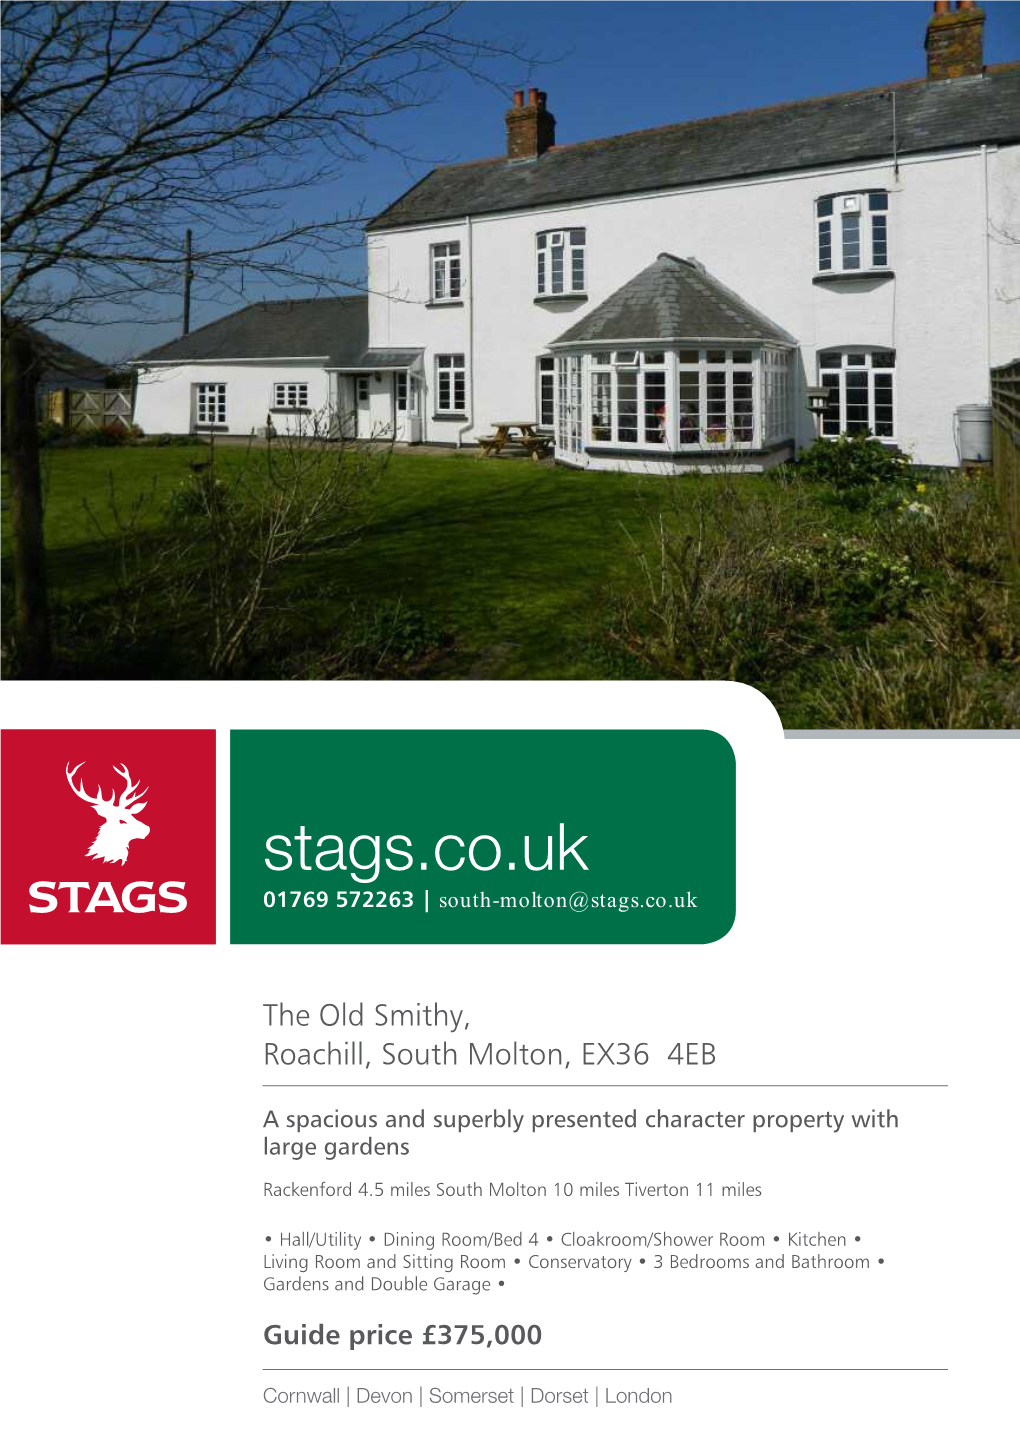 Stags.Co.Uk 01769 572263 | South-Molton@Stags.Co.Uk